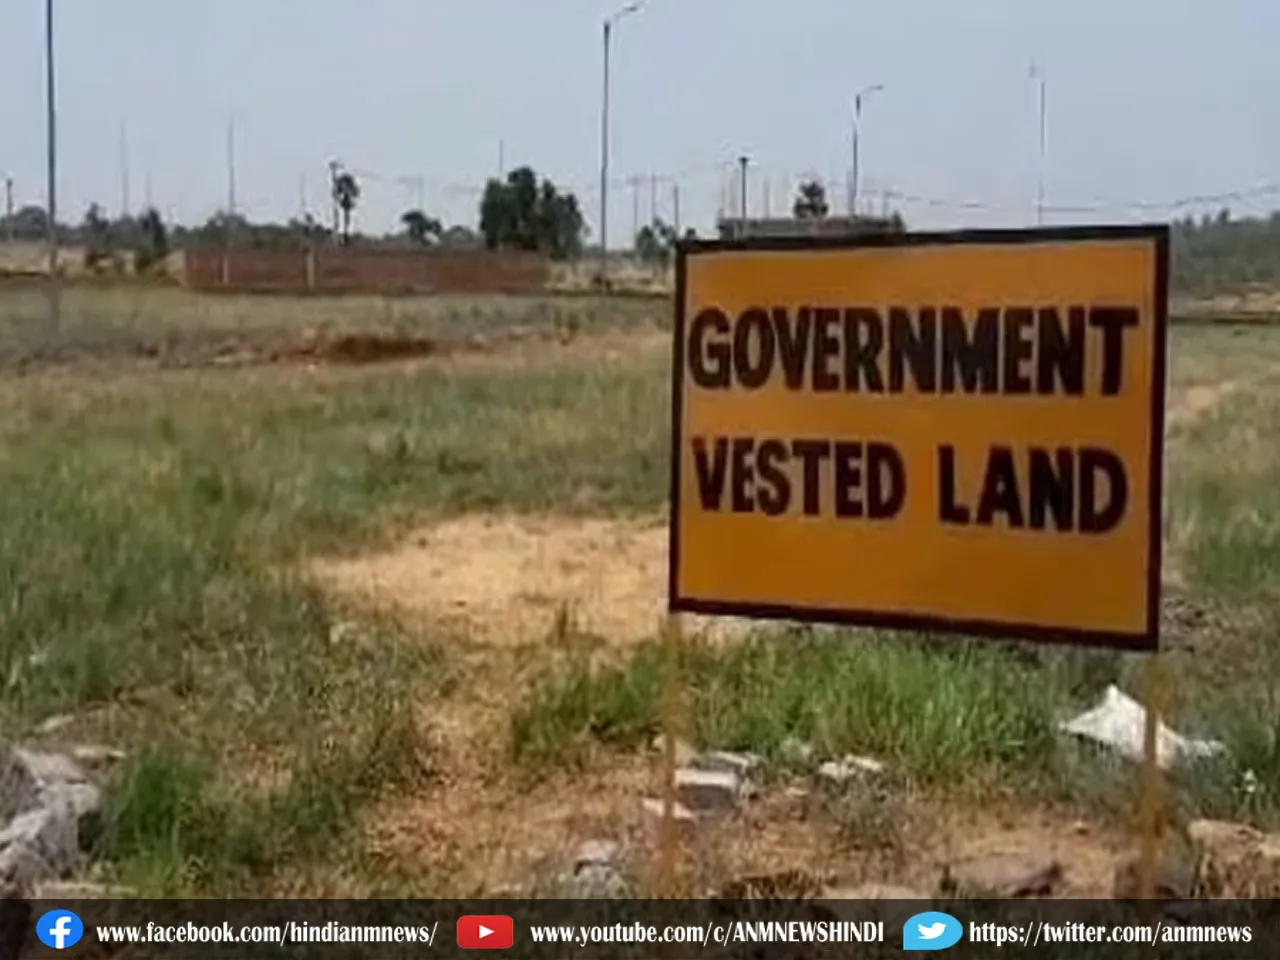 goverment wested land